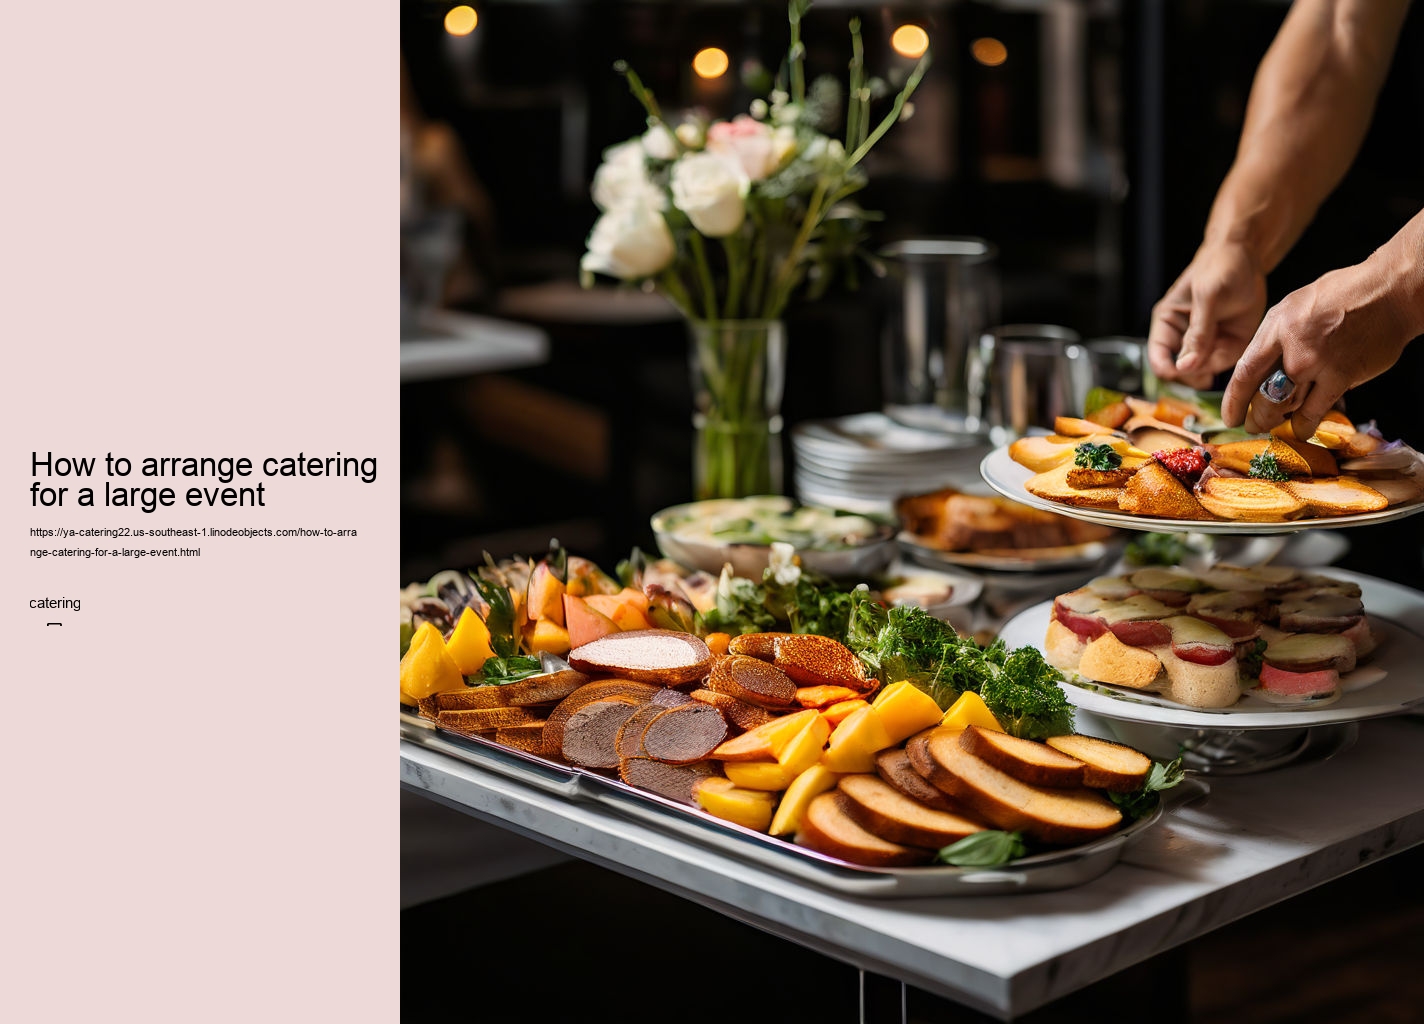 How to arrange catering for a large event